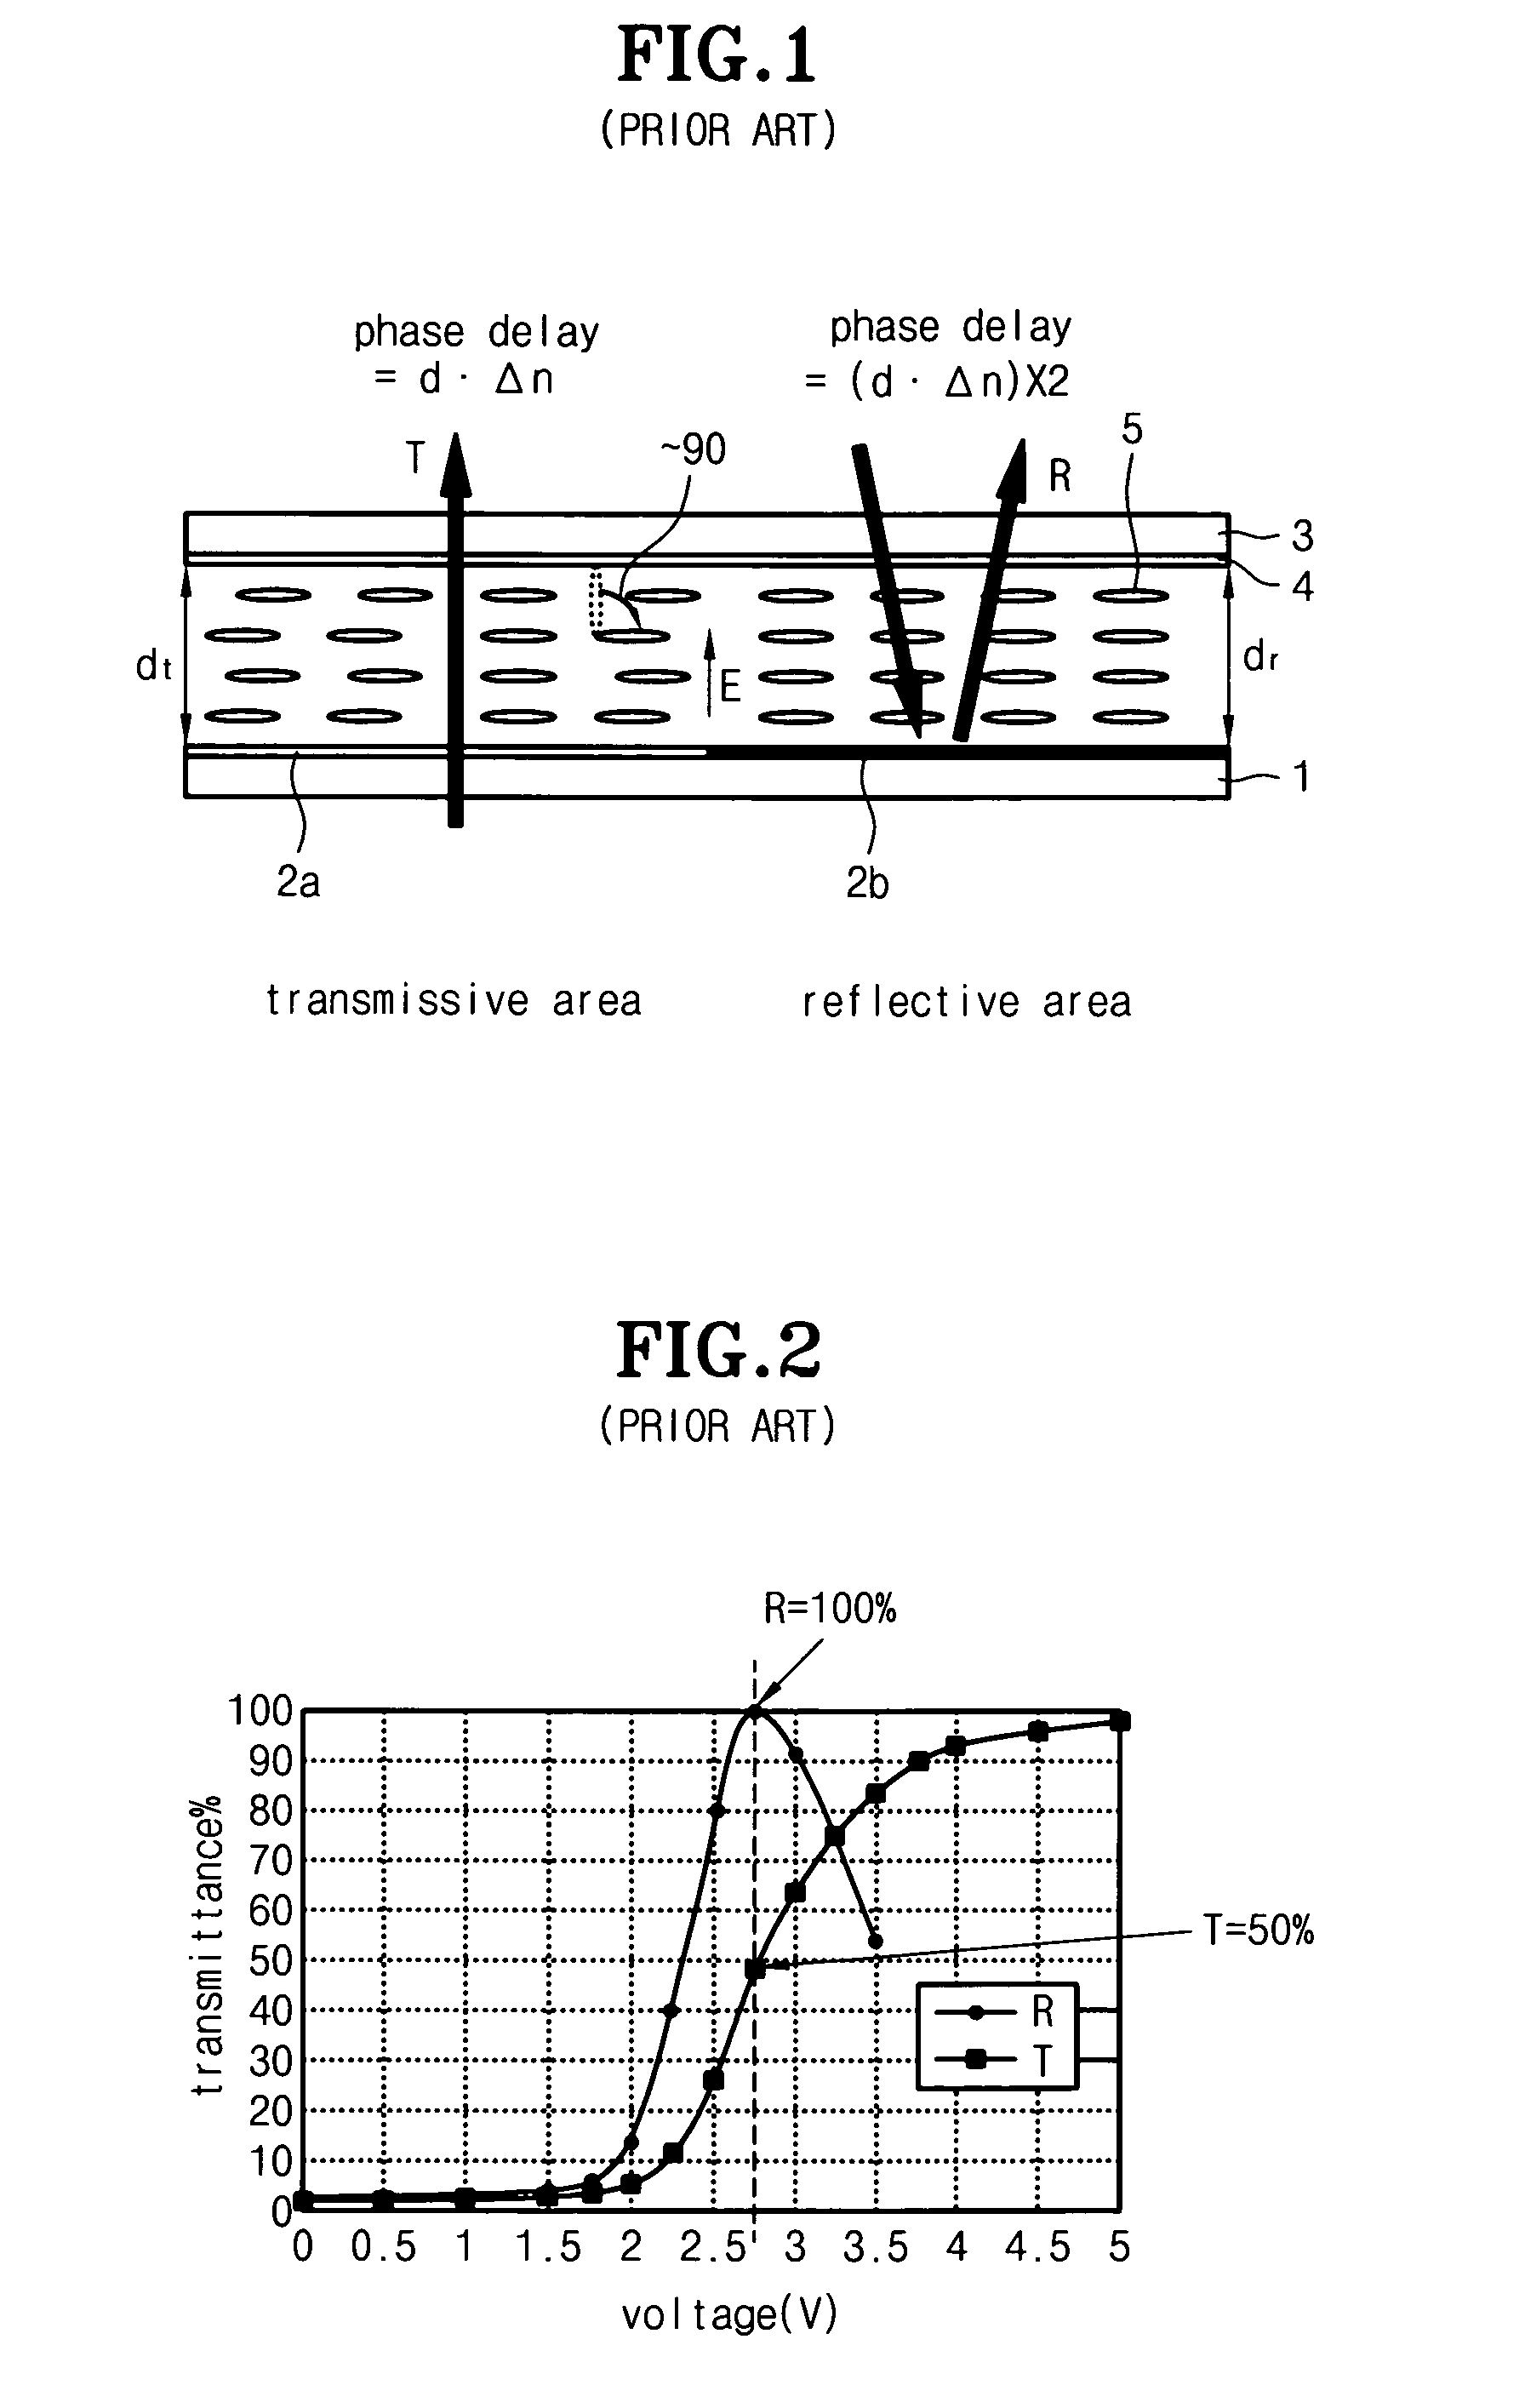 Fringe field switching mode transflective liquid crystal display